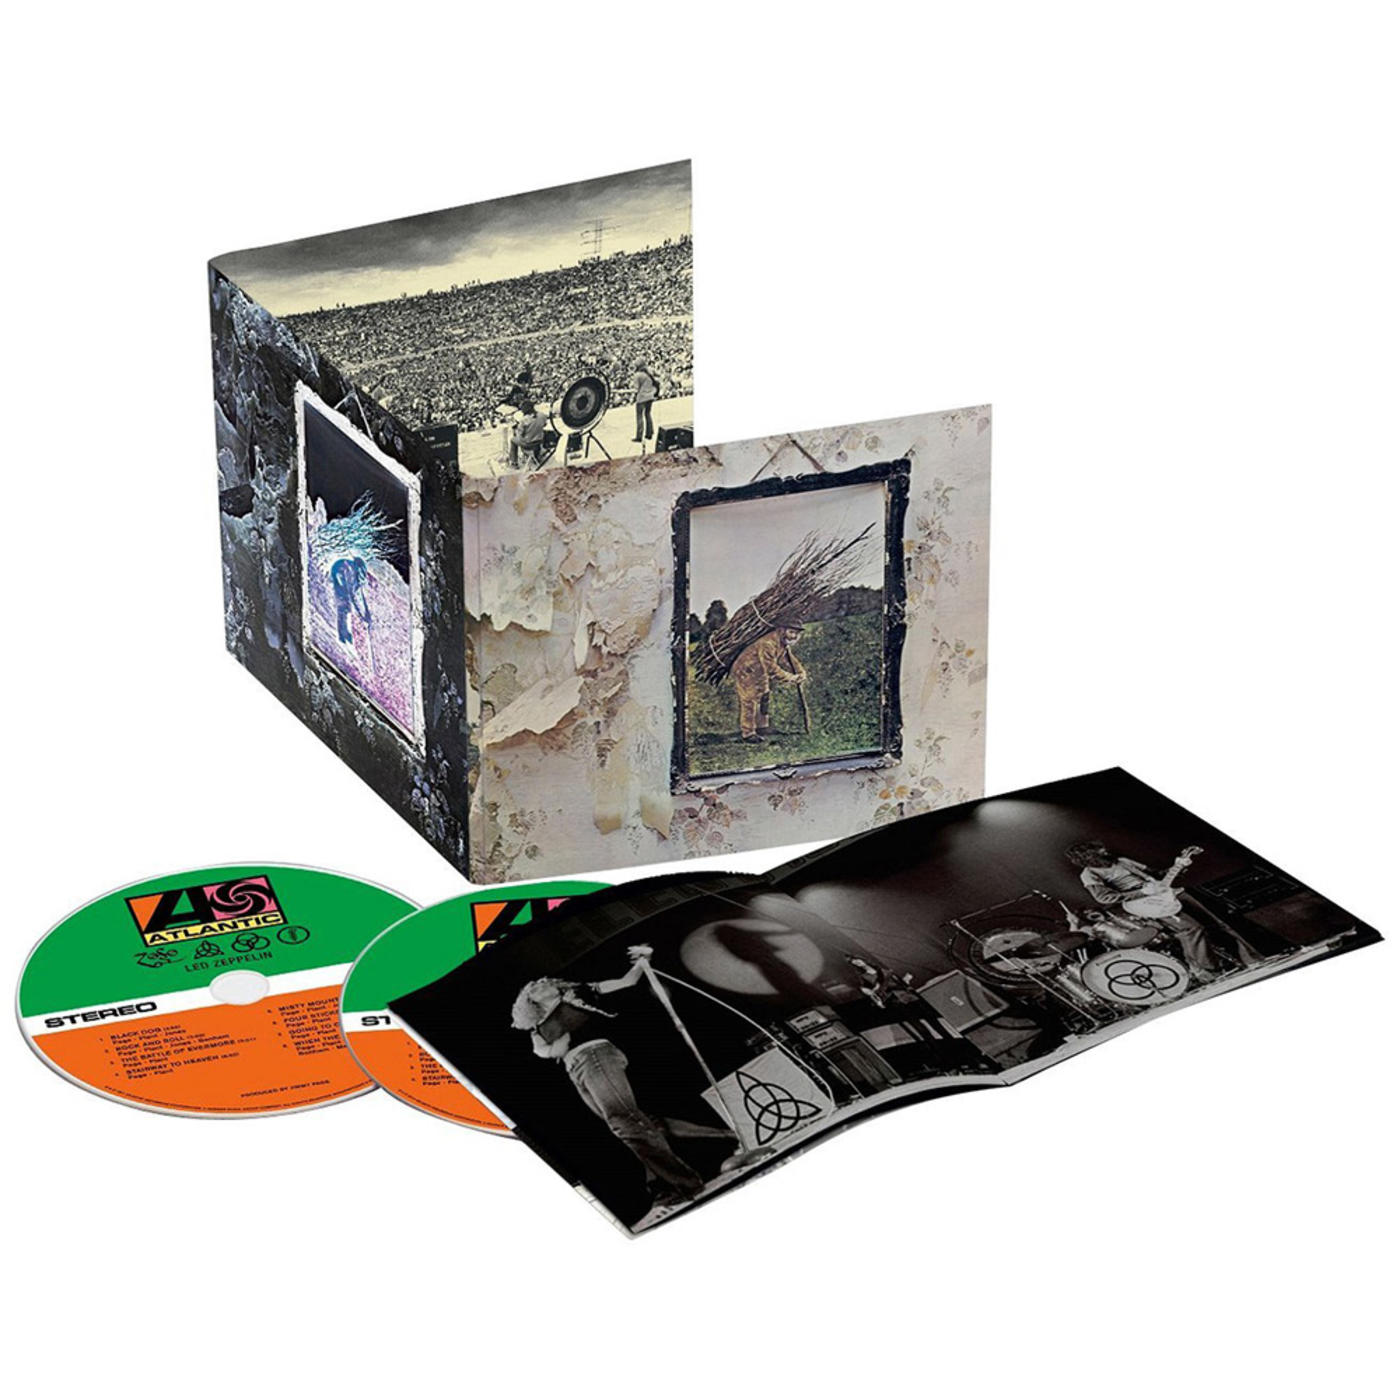 Led Zeppelin IV - 2CD Deluxe Edition